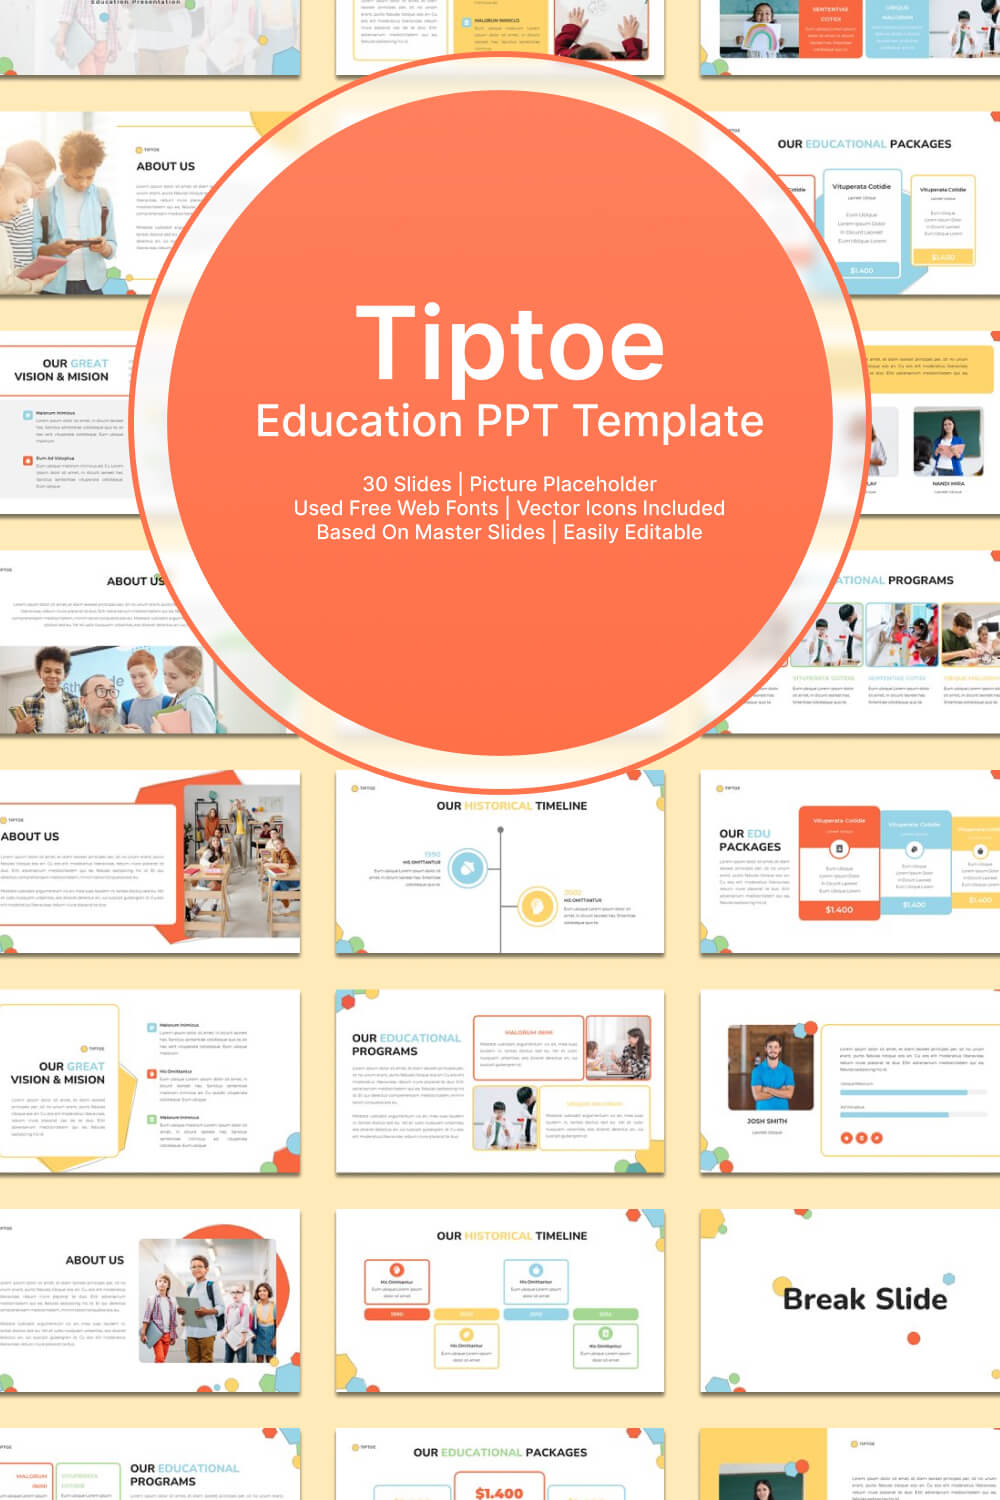 Lots of slides with educational templates and carrot circle title "Tiptoe, Education PPT Template".